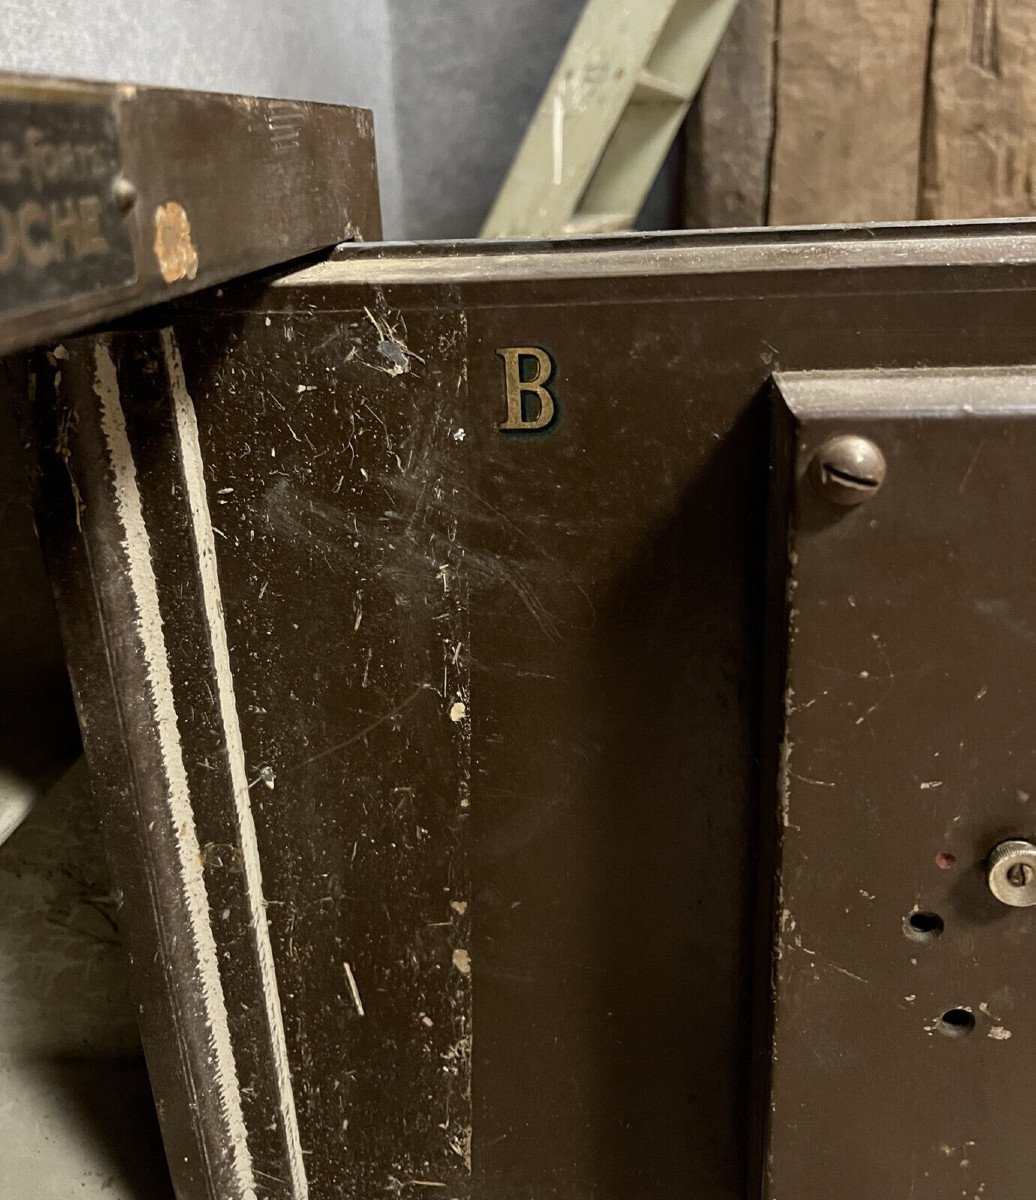 Old Bauche Armored Safe -photo-3